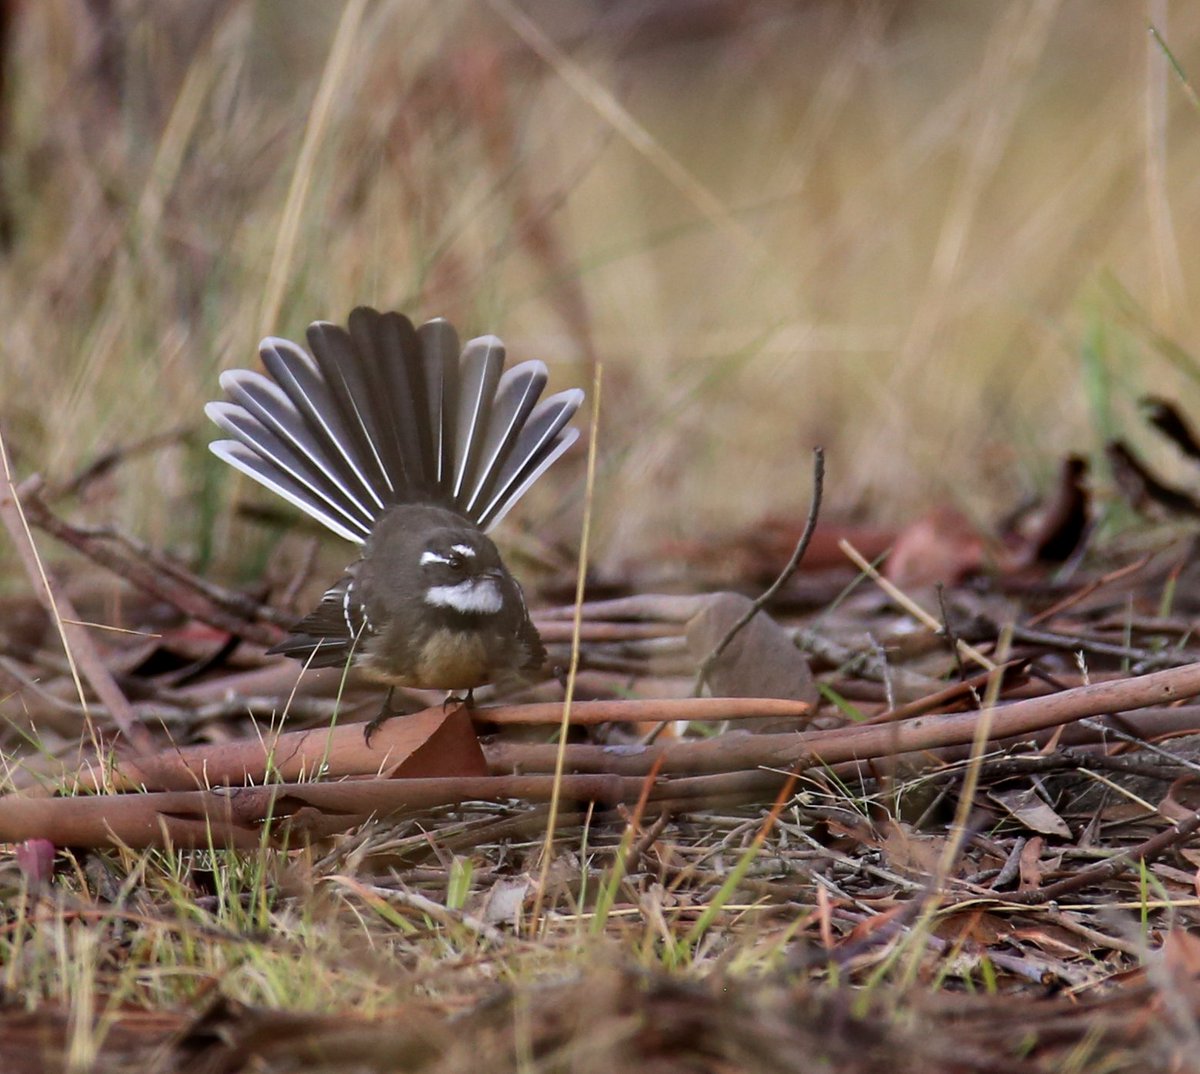 The woodland is full of dancing fantails
#GreyFantail #WildOz #OzBirds #BoxGumGrassyWoodland #AutumnMigration